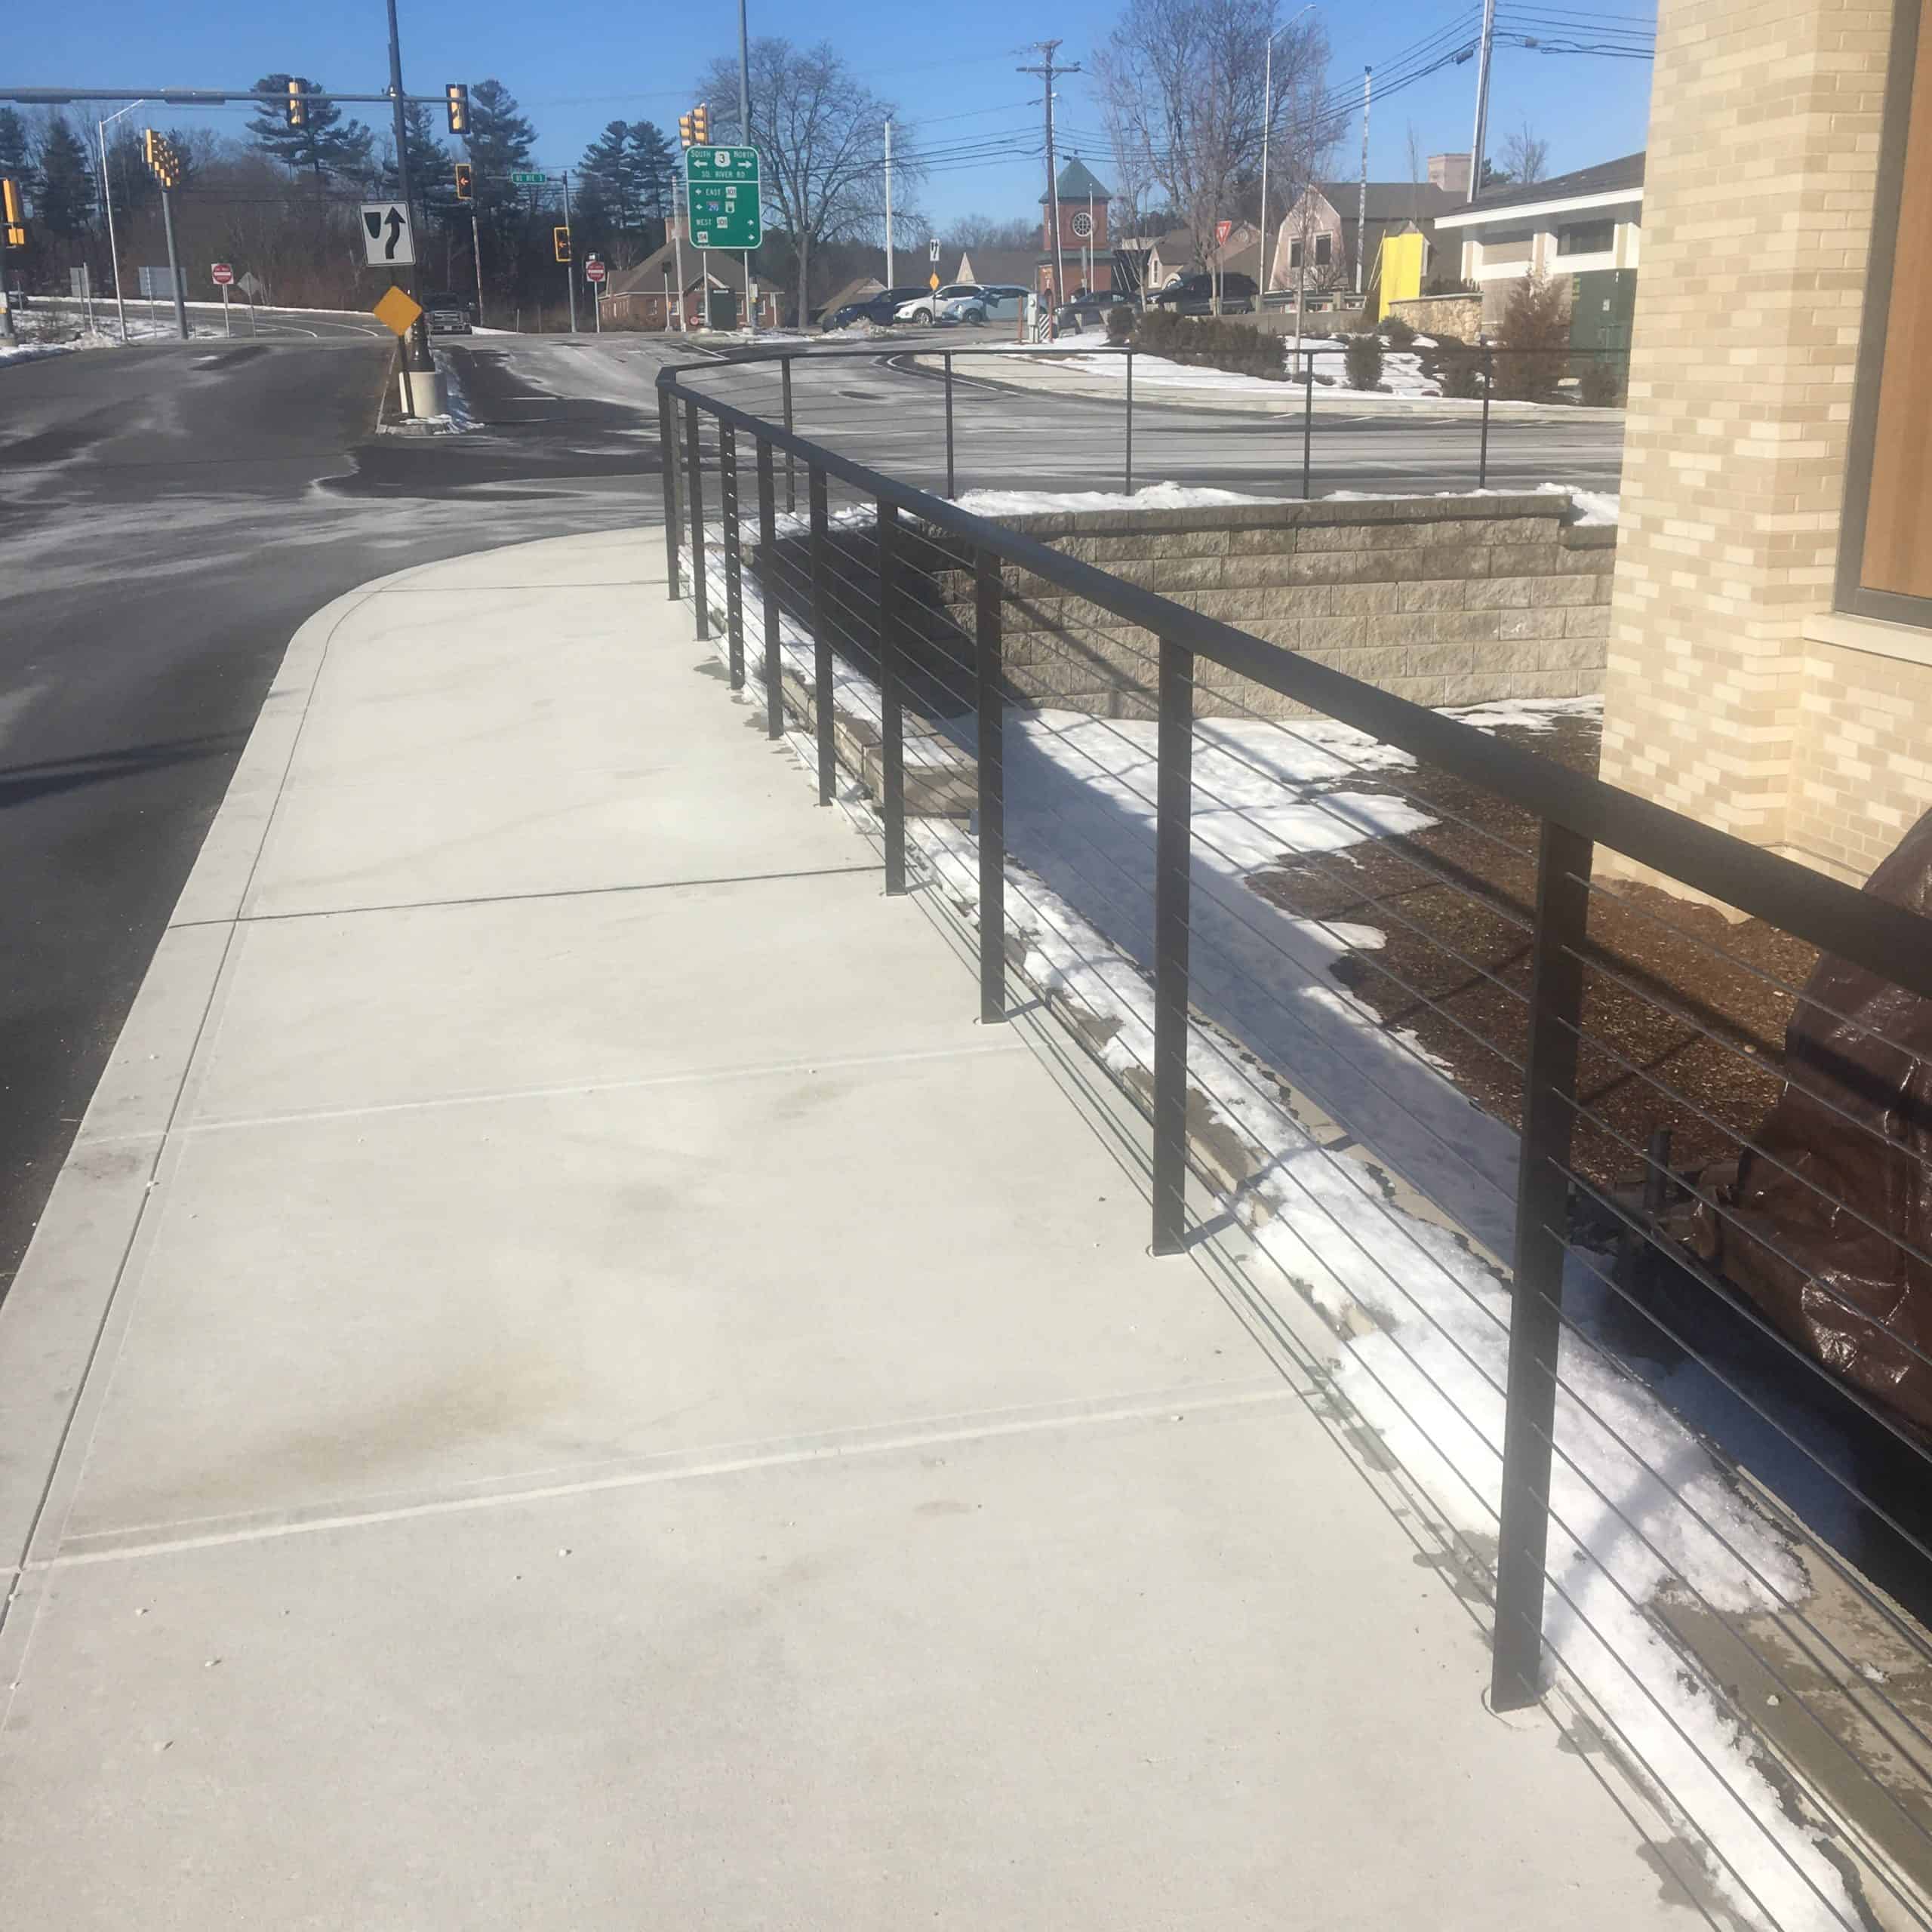 Stainless Steel Railing - Market & Main - Bedford, NH